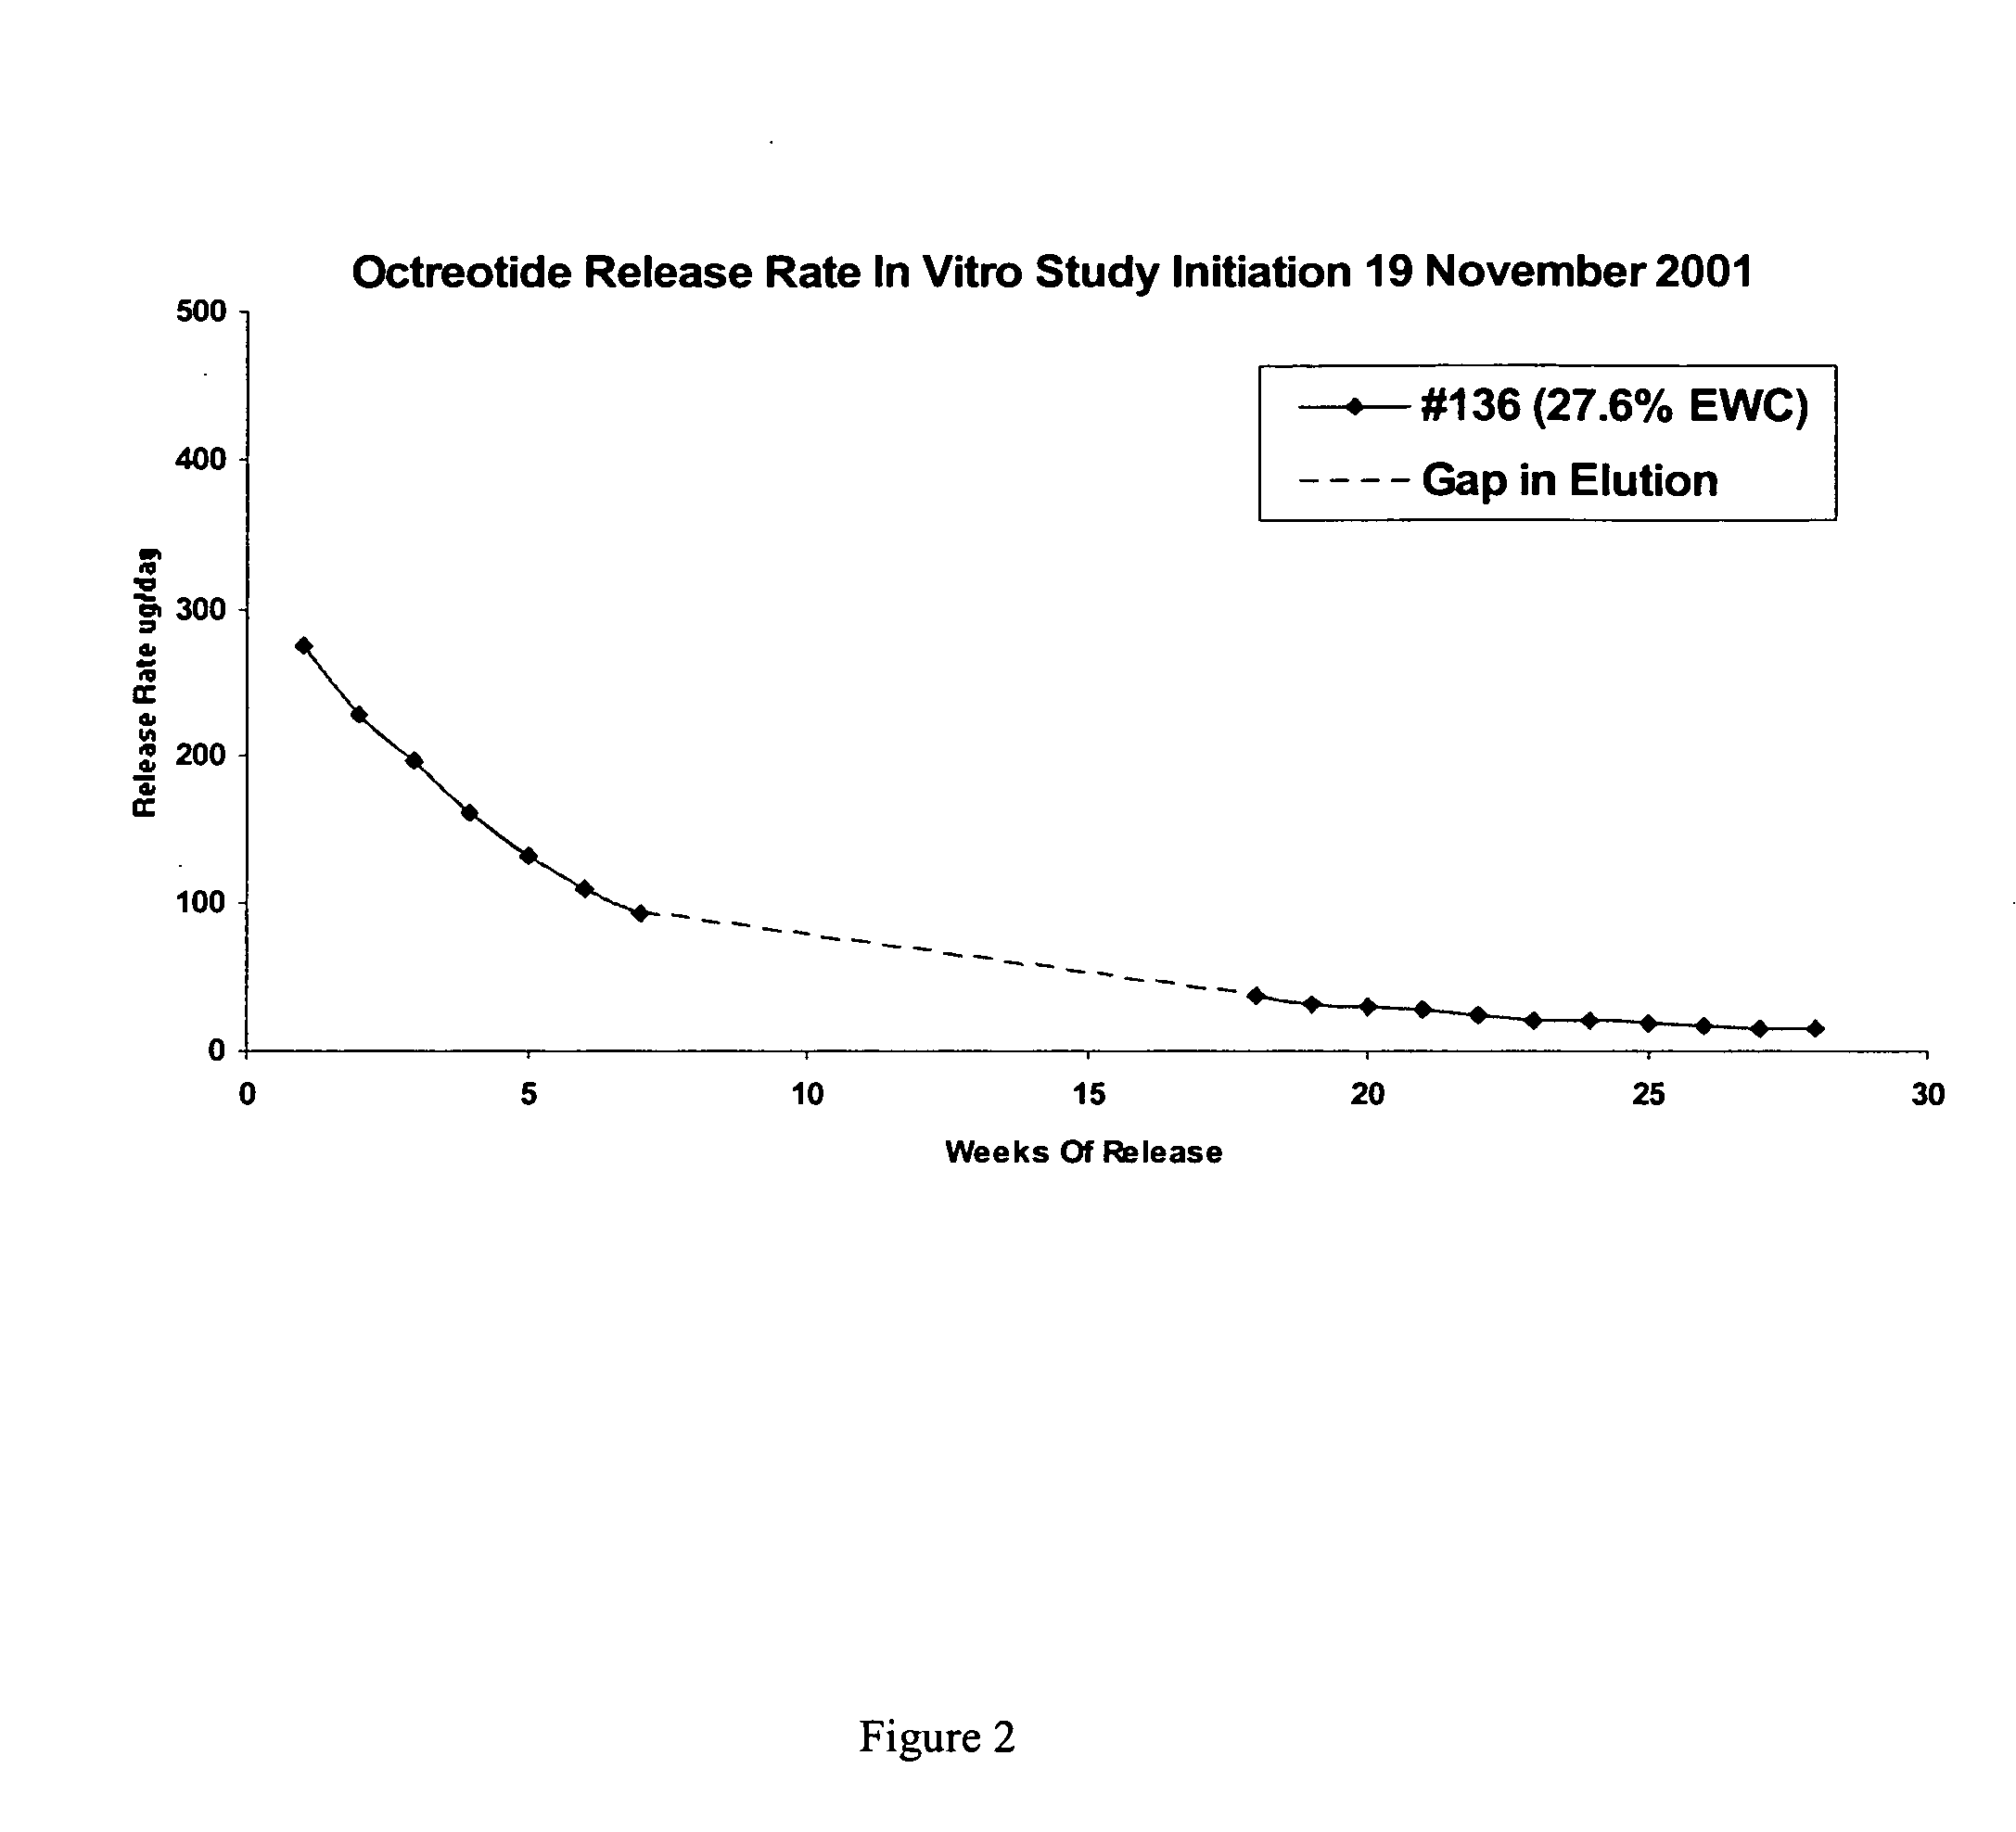 Controlled release formulations of octreotide